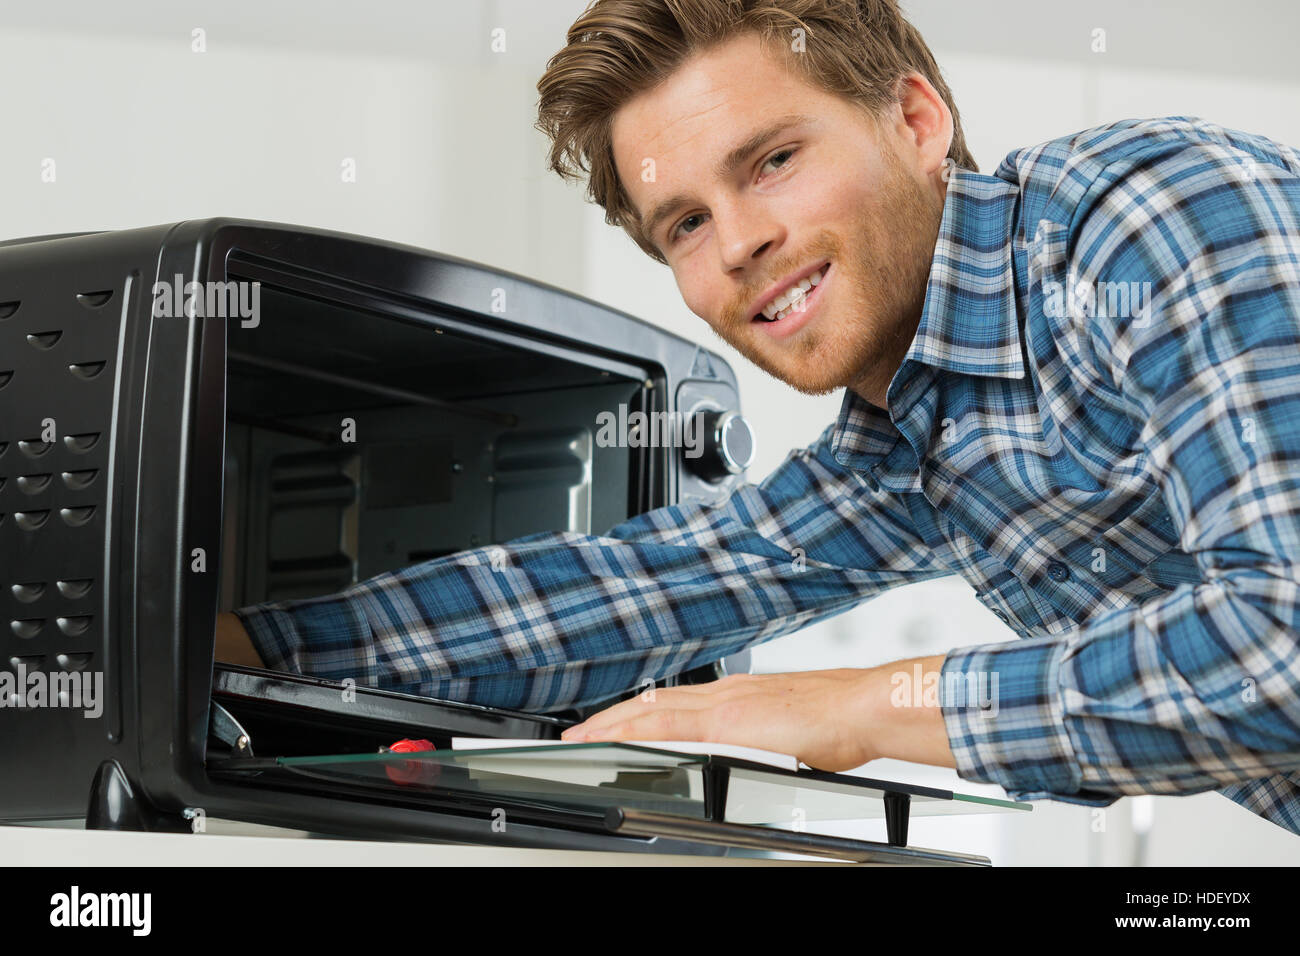 fixing an oven toaster Stock Photo